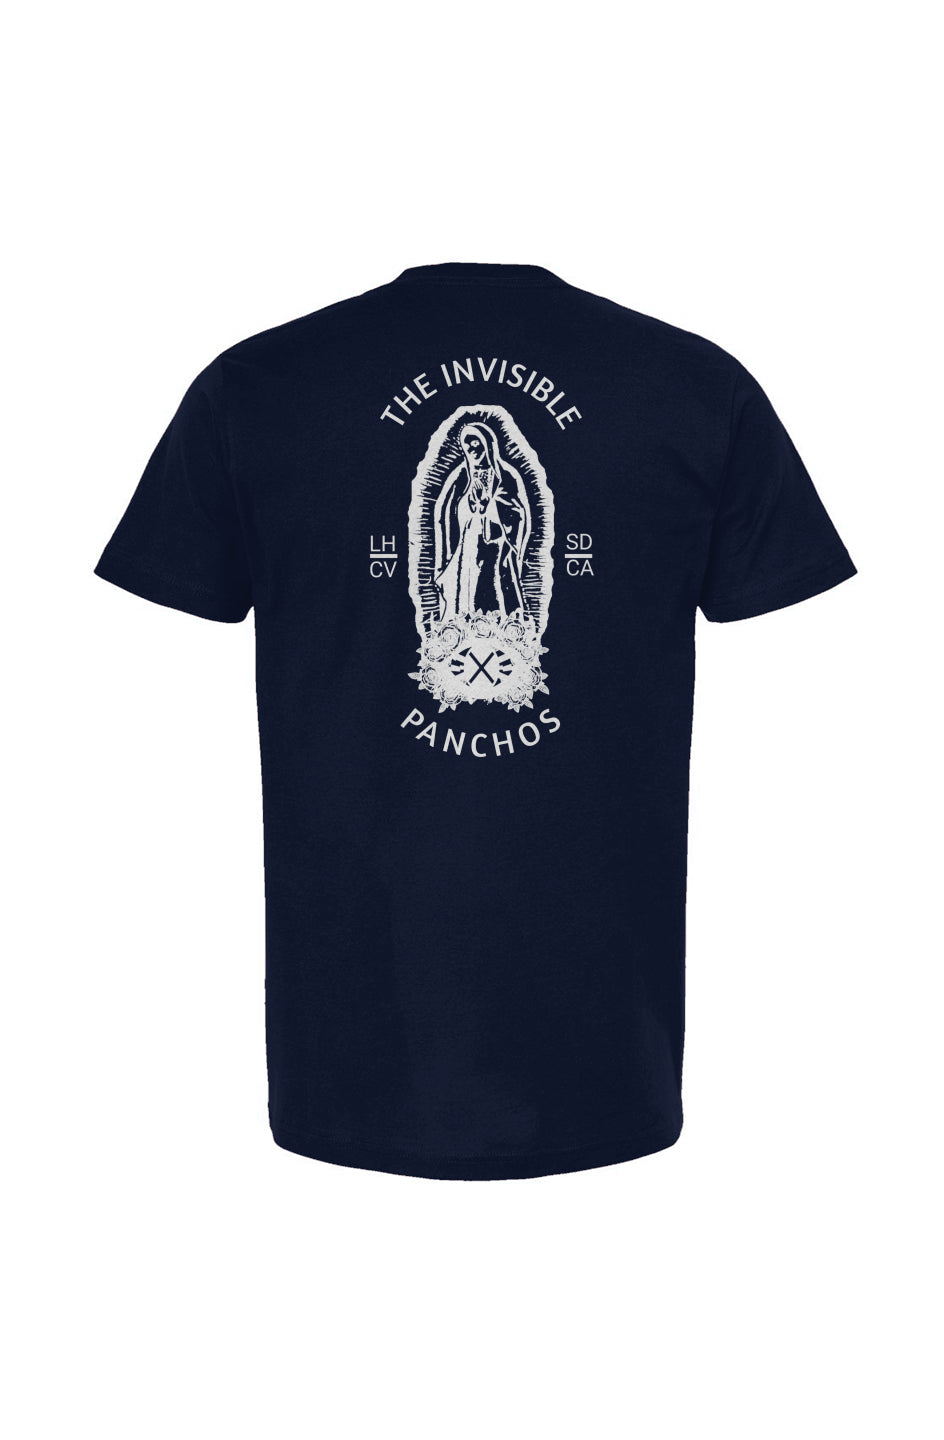 The Invisible Panchos Mother T- White/ Navy